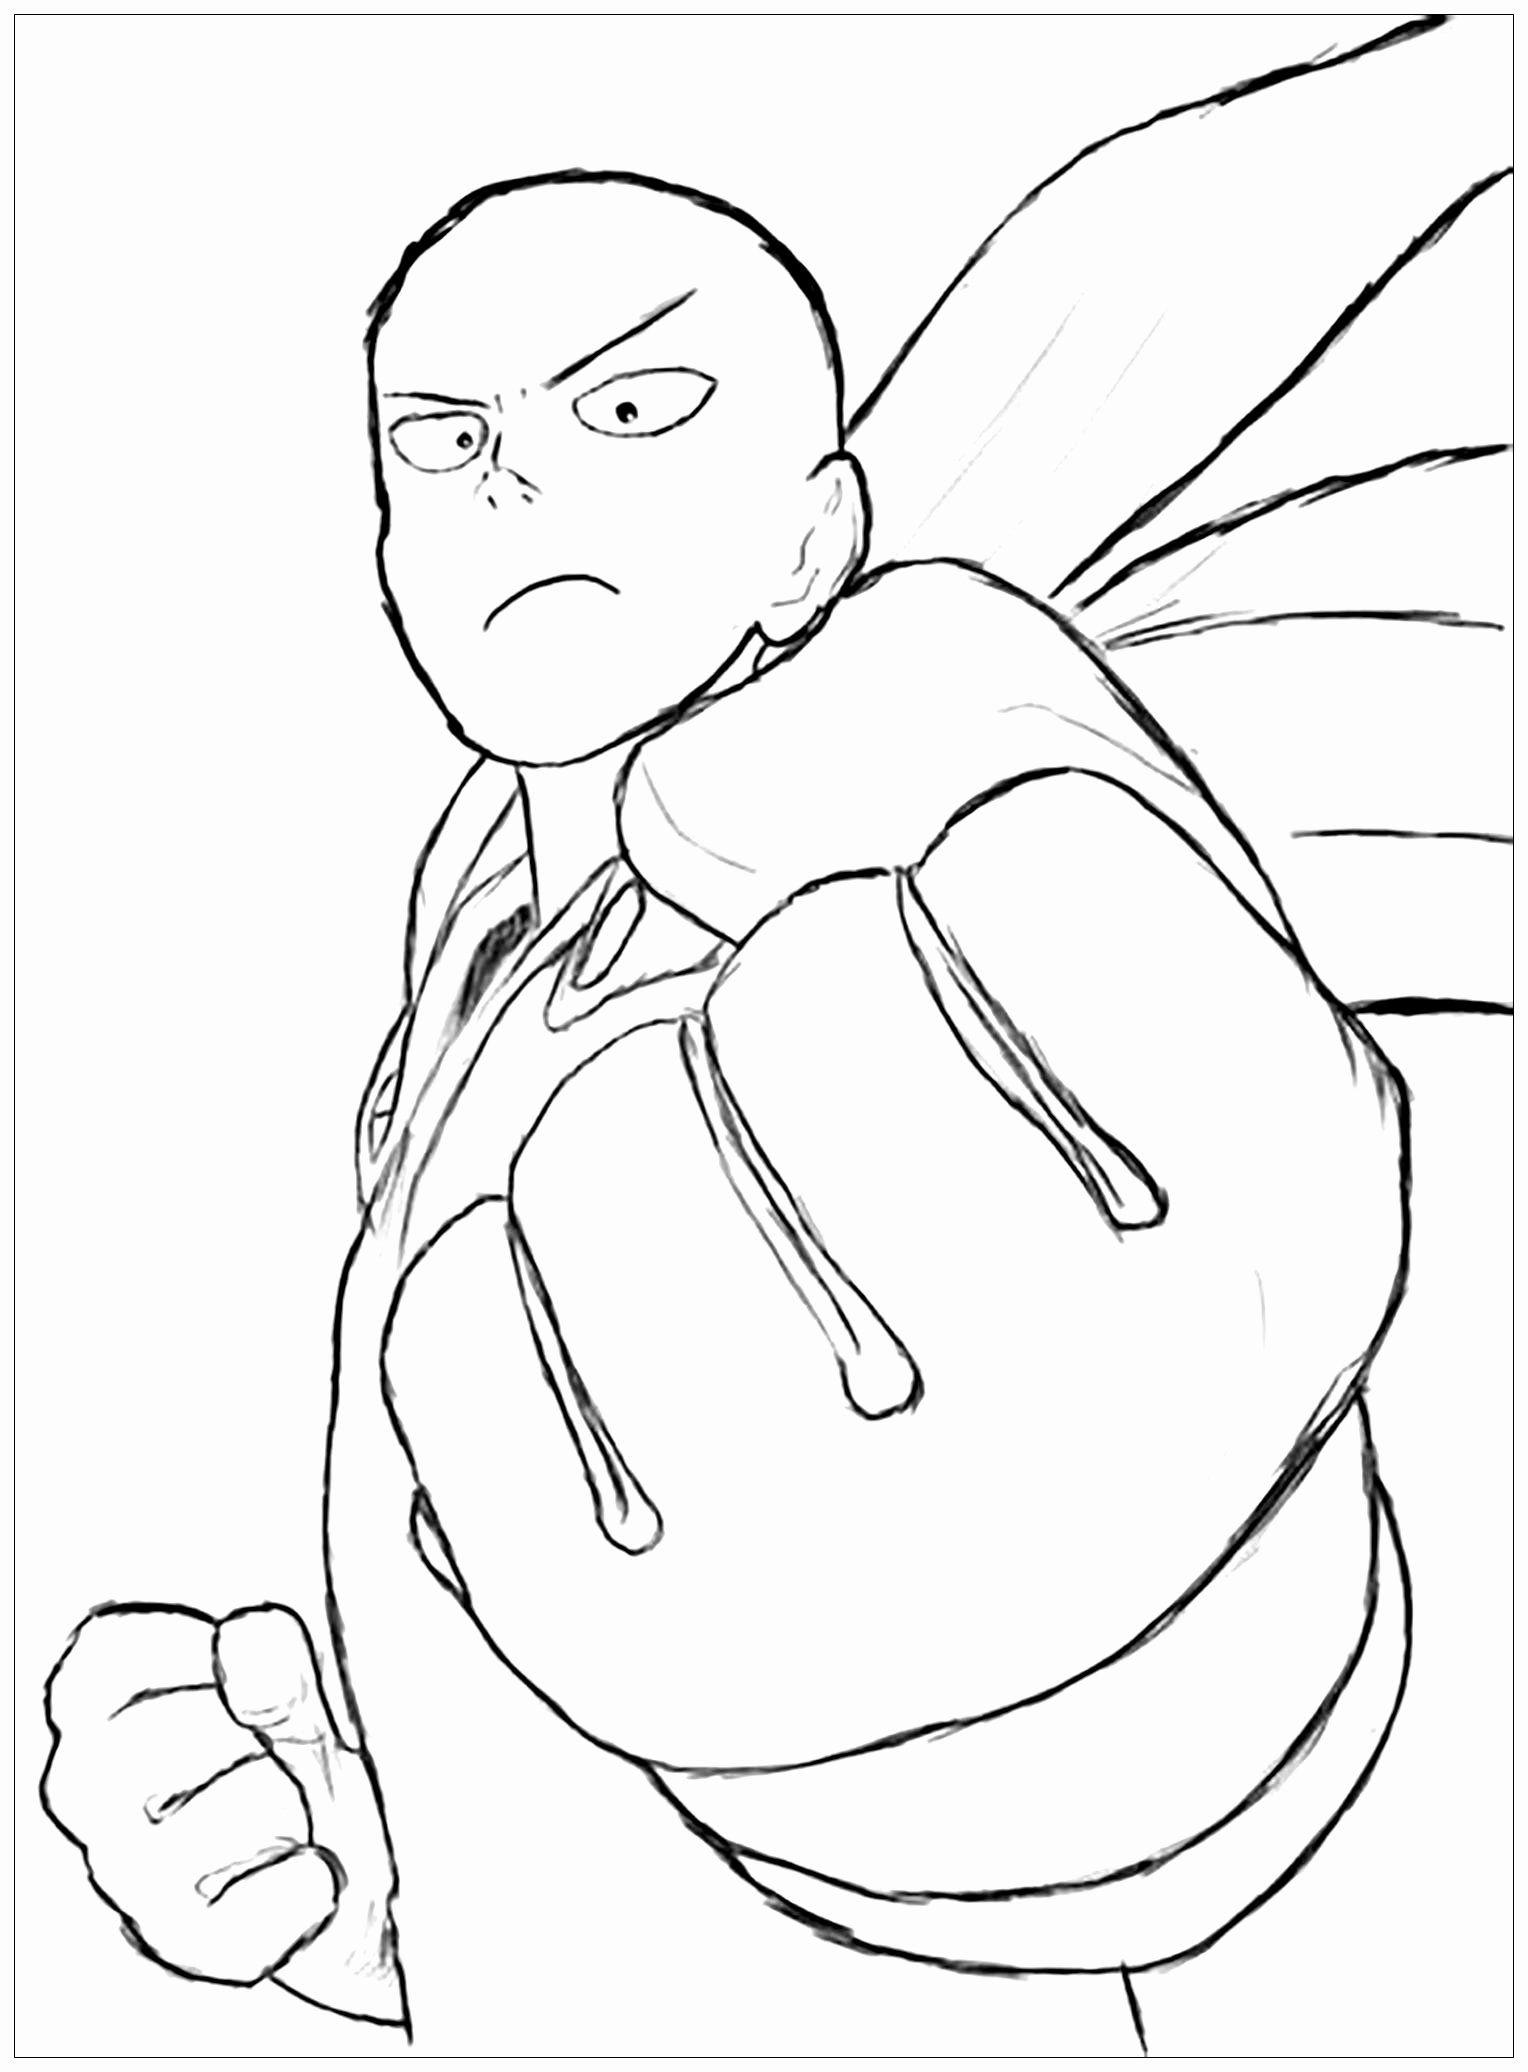 One-punch Man Anime Coloring Pages Ideas Awesome 20 New For Easy E Punch  Man Anime Drawing Cine Regard | One Punch Man Anime, One Punch Man,  Coloring Pages - Coloring Home